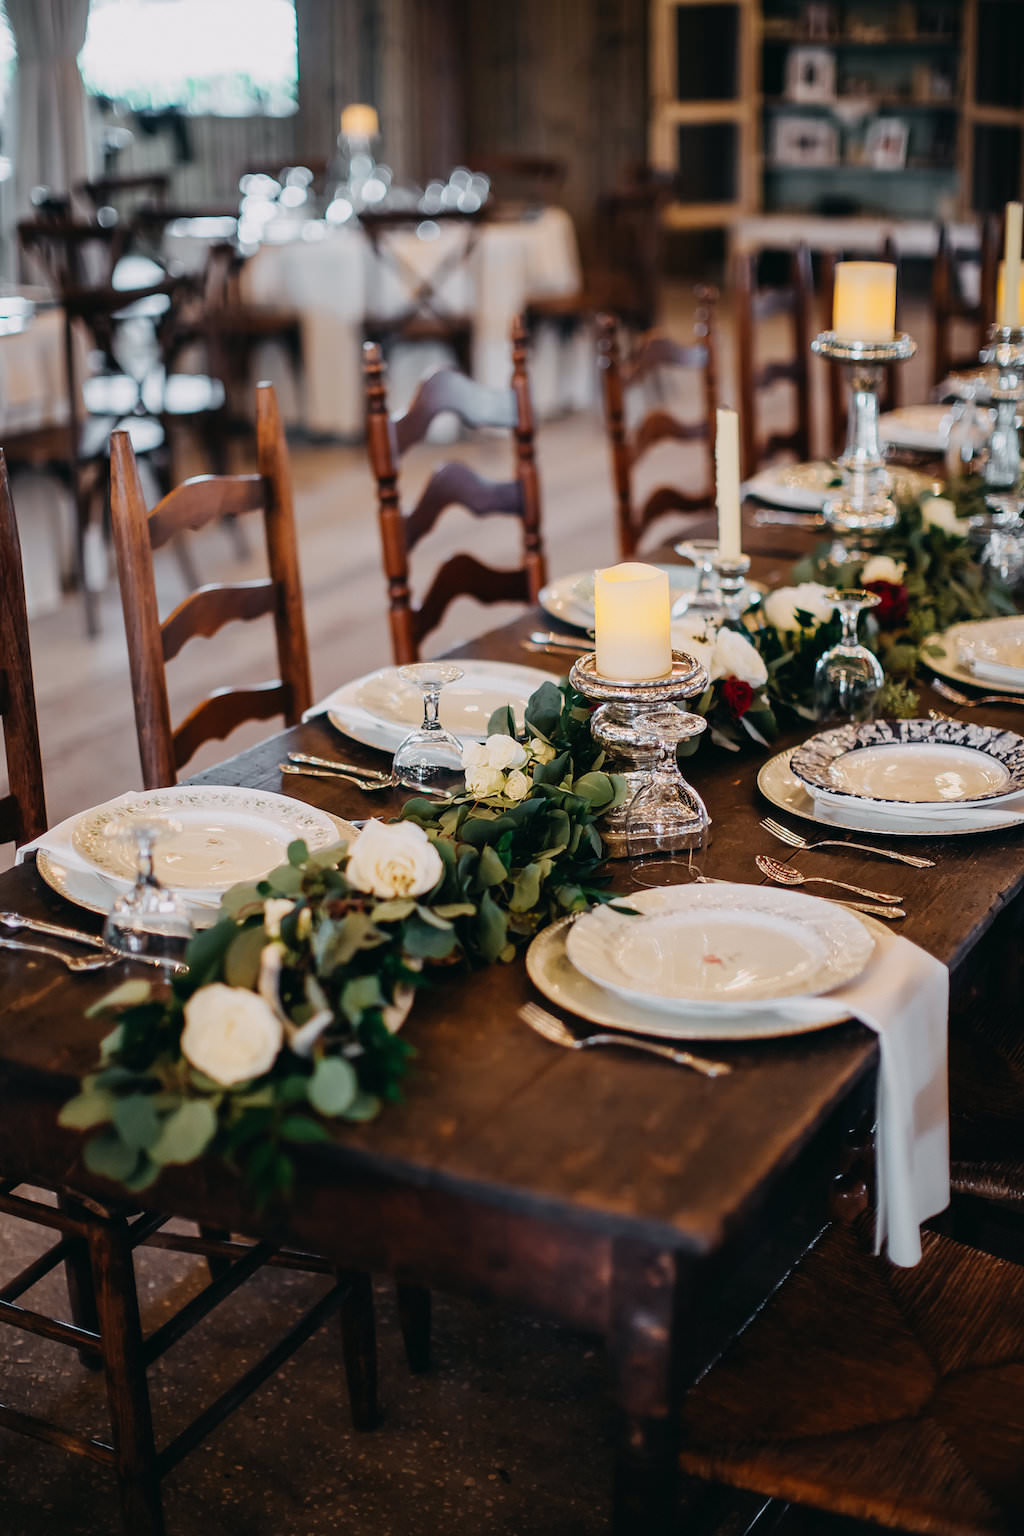 Indoor Rustic Barn Wedding Reception Decor with Long Wooden Feasting Tables with Greenery Garland Centerpiece and White Roses with Pillar Candles with Silver Candlestick Holders, White Linens with Decorative China Plate Setting | Tampa Bay Wedding Photographer Rad Red Creative | Lithia Wedding Venue Southern Grace